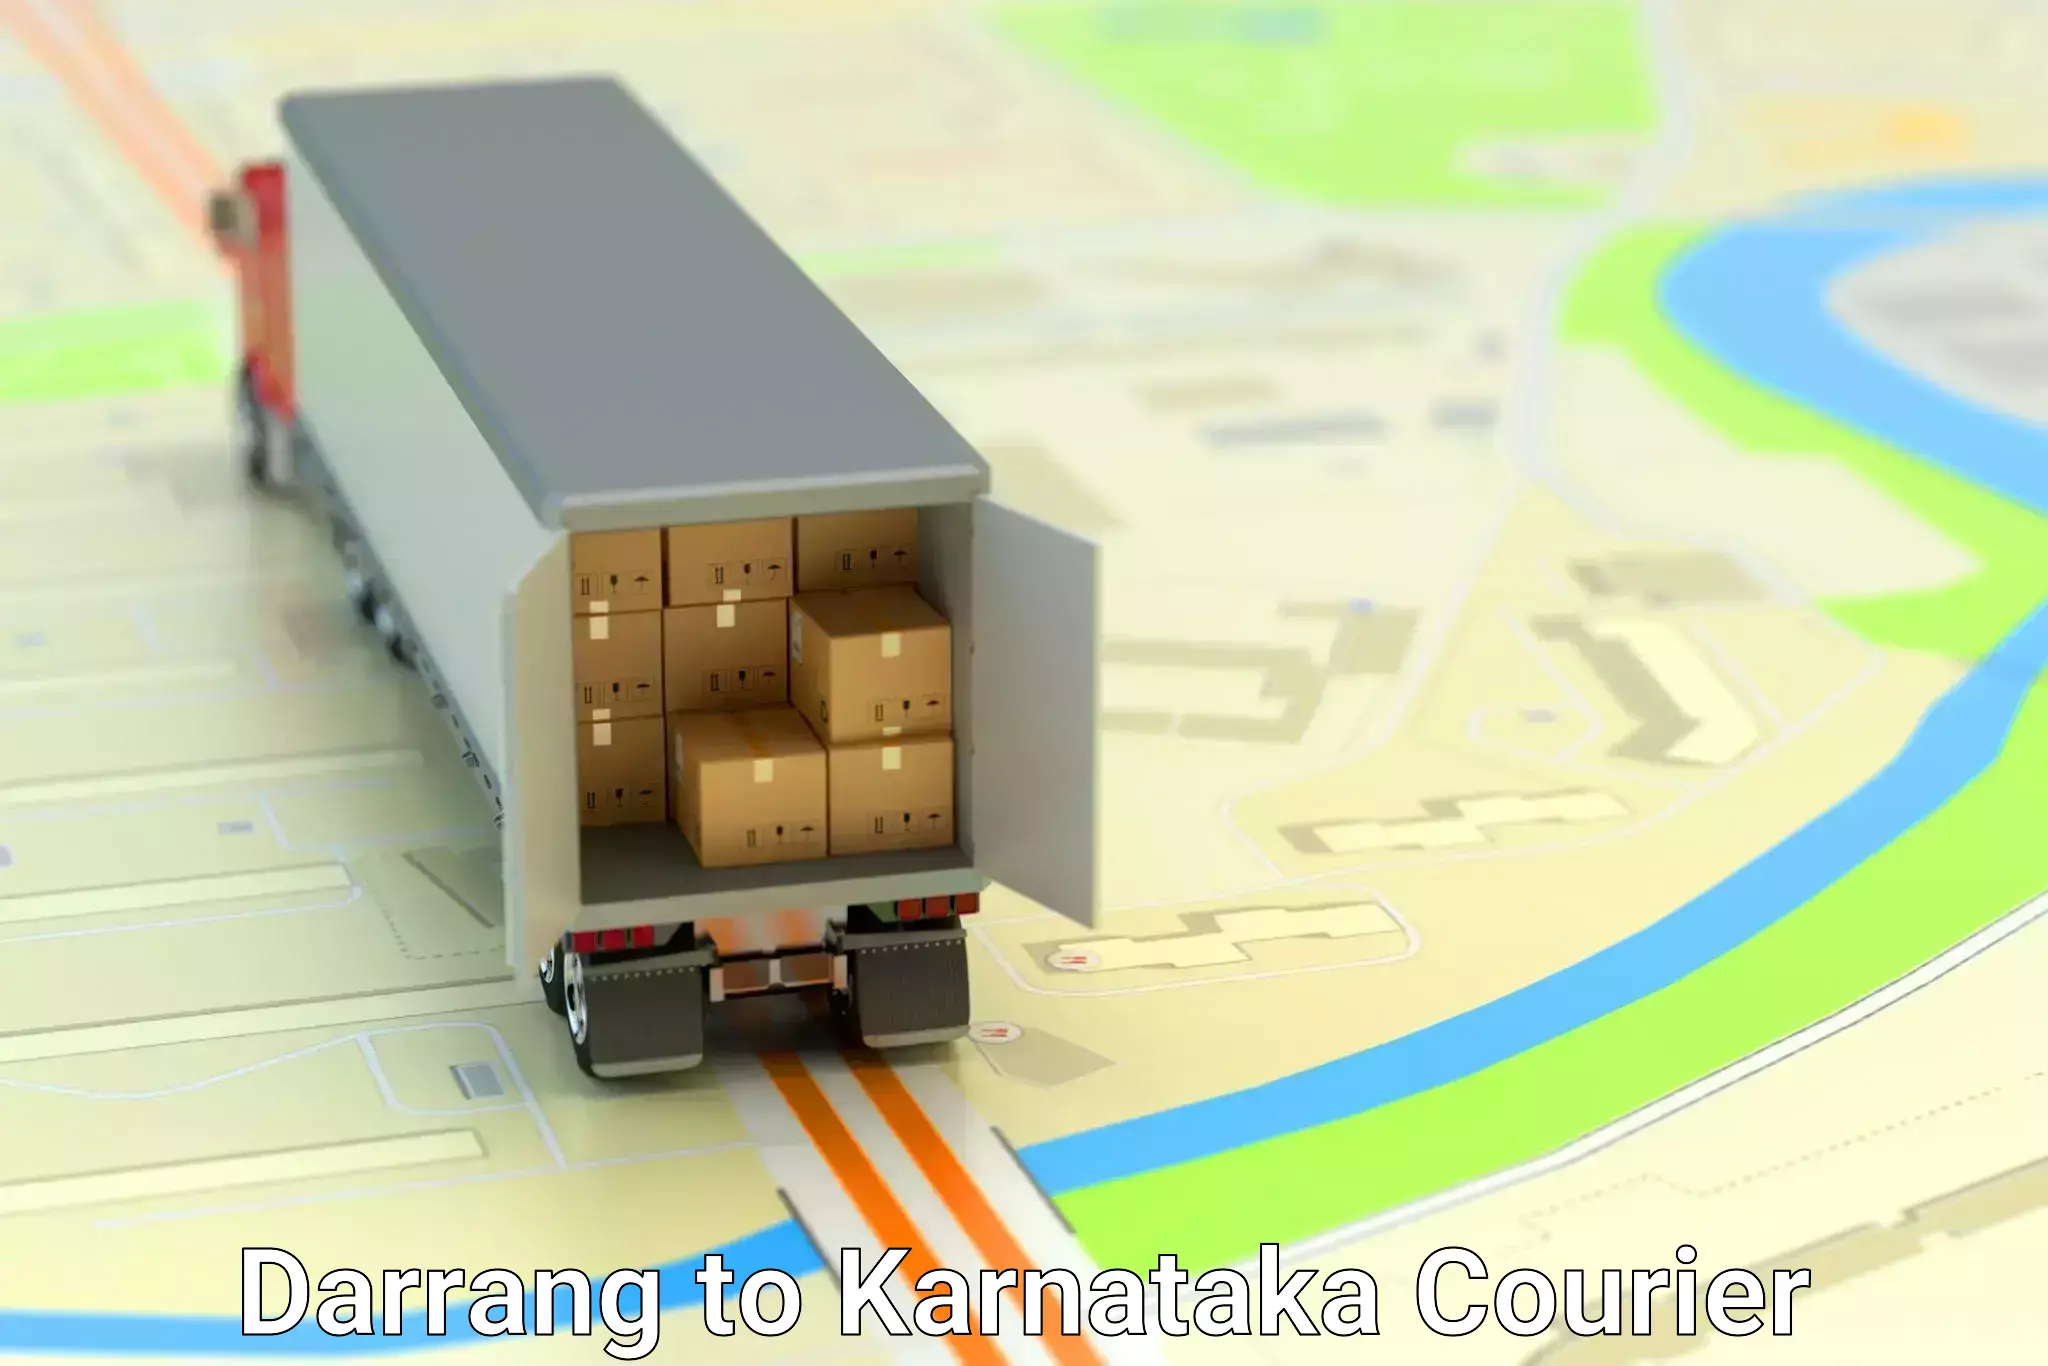 State-of-the-art courier technology Darrang to Deodurga